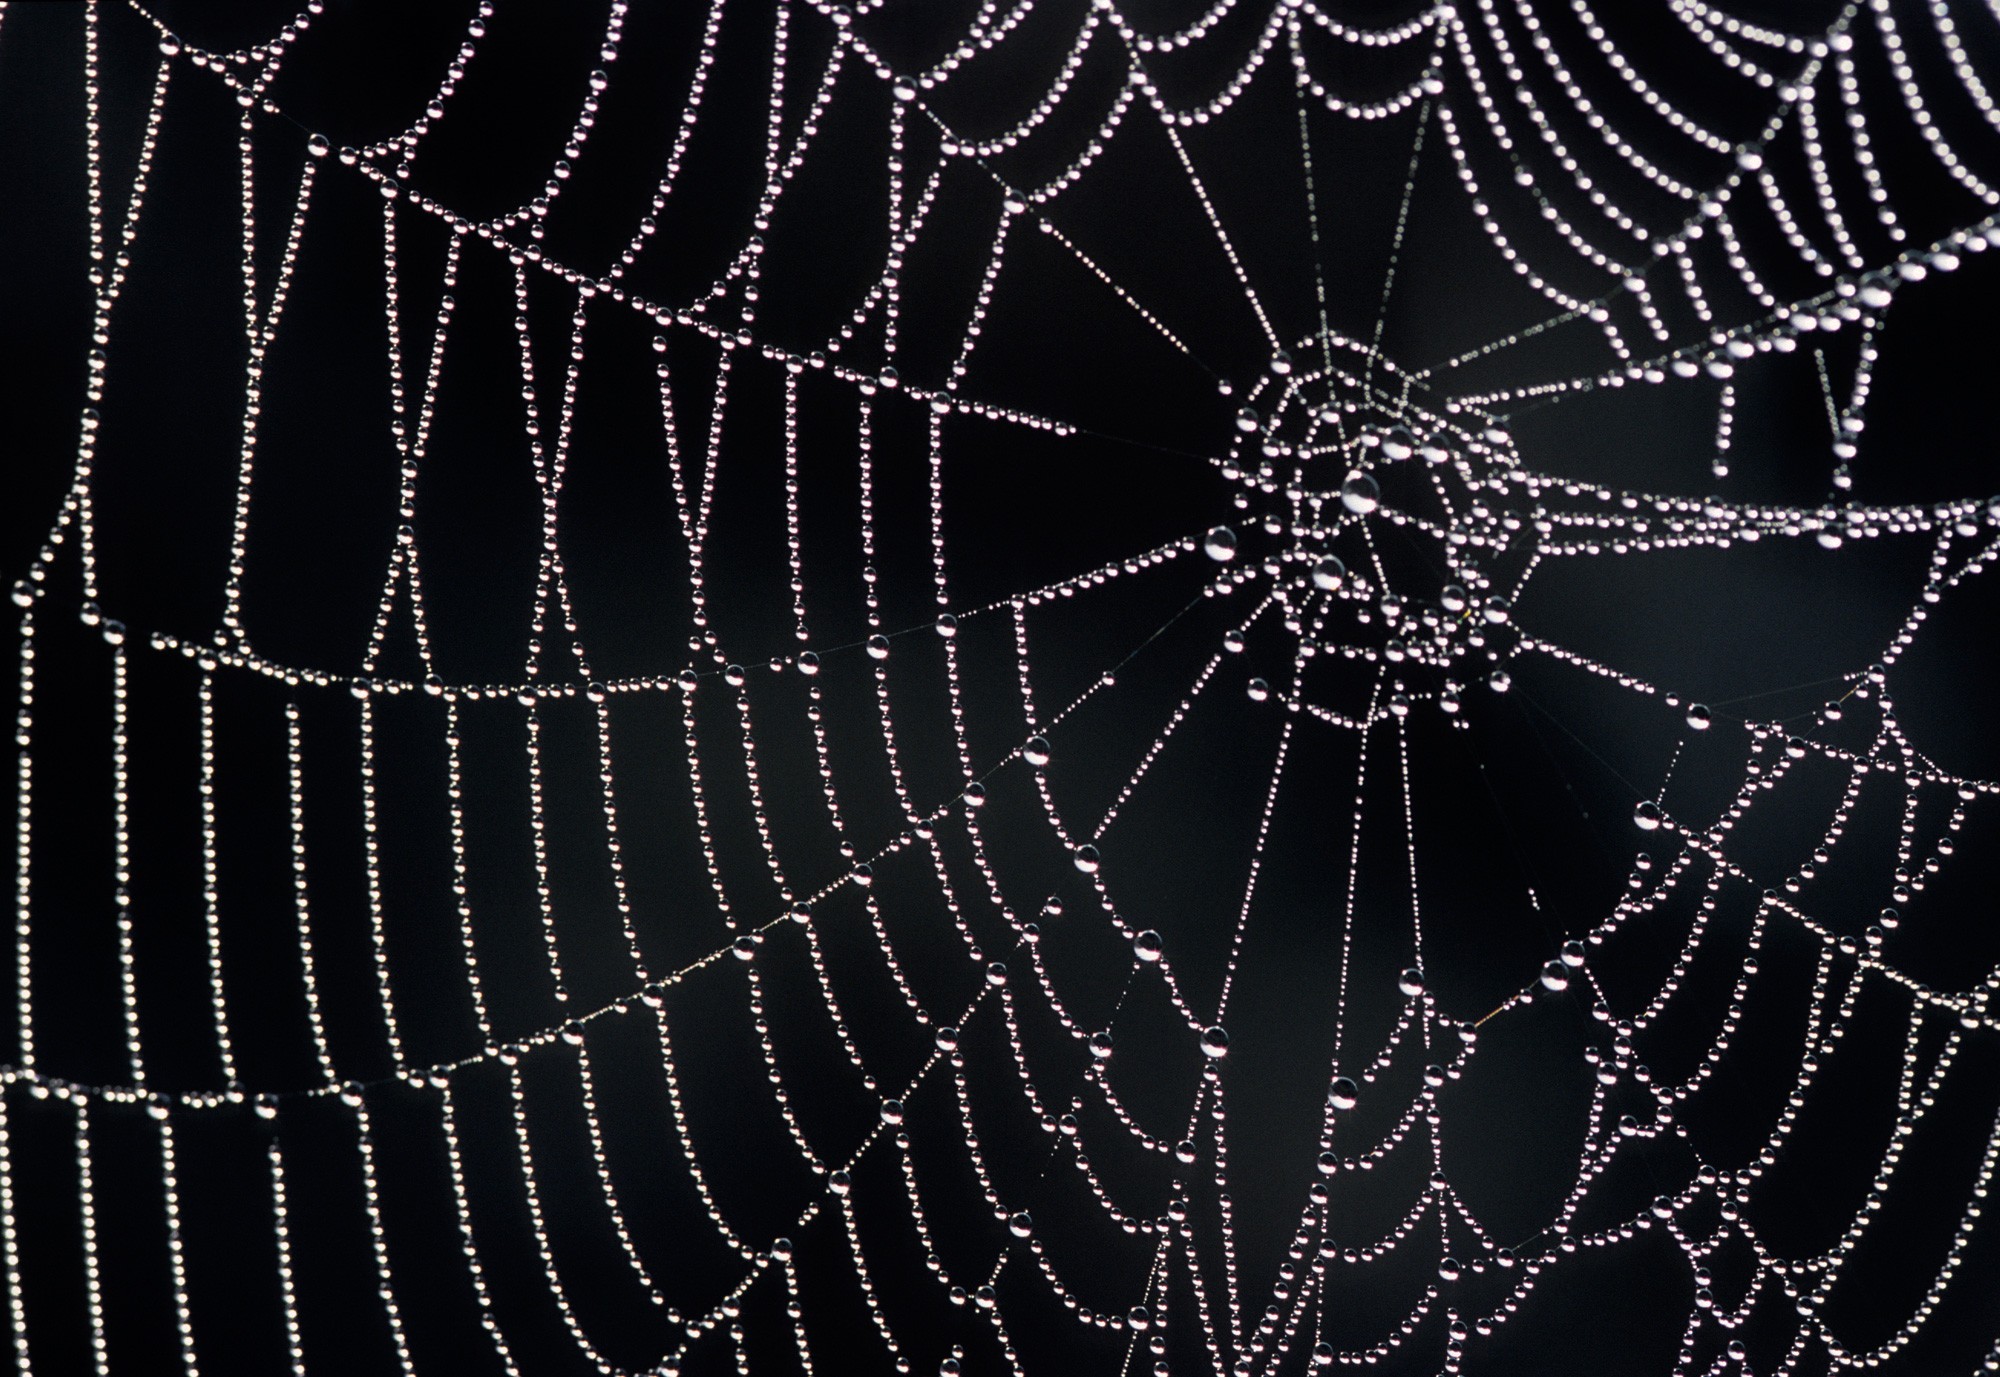 dew-collected-in-spider-web